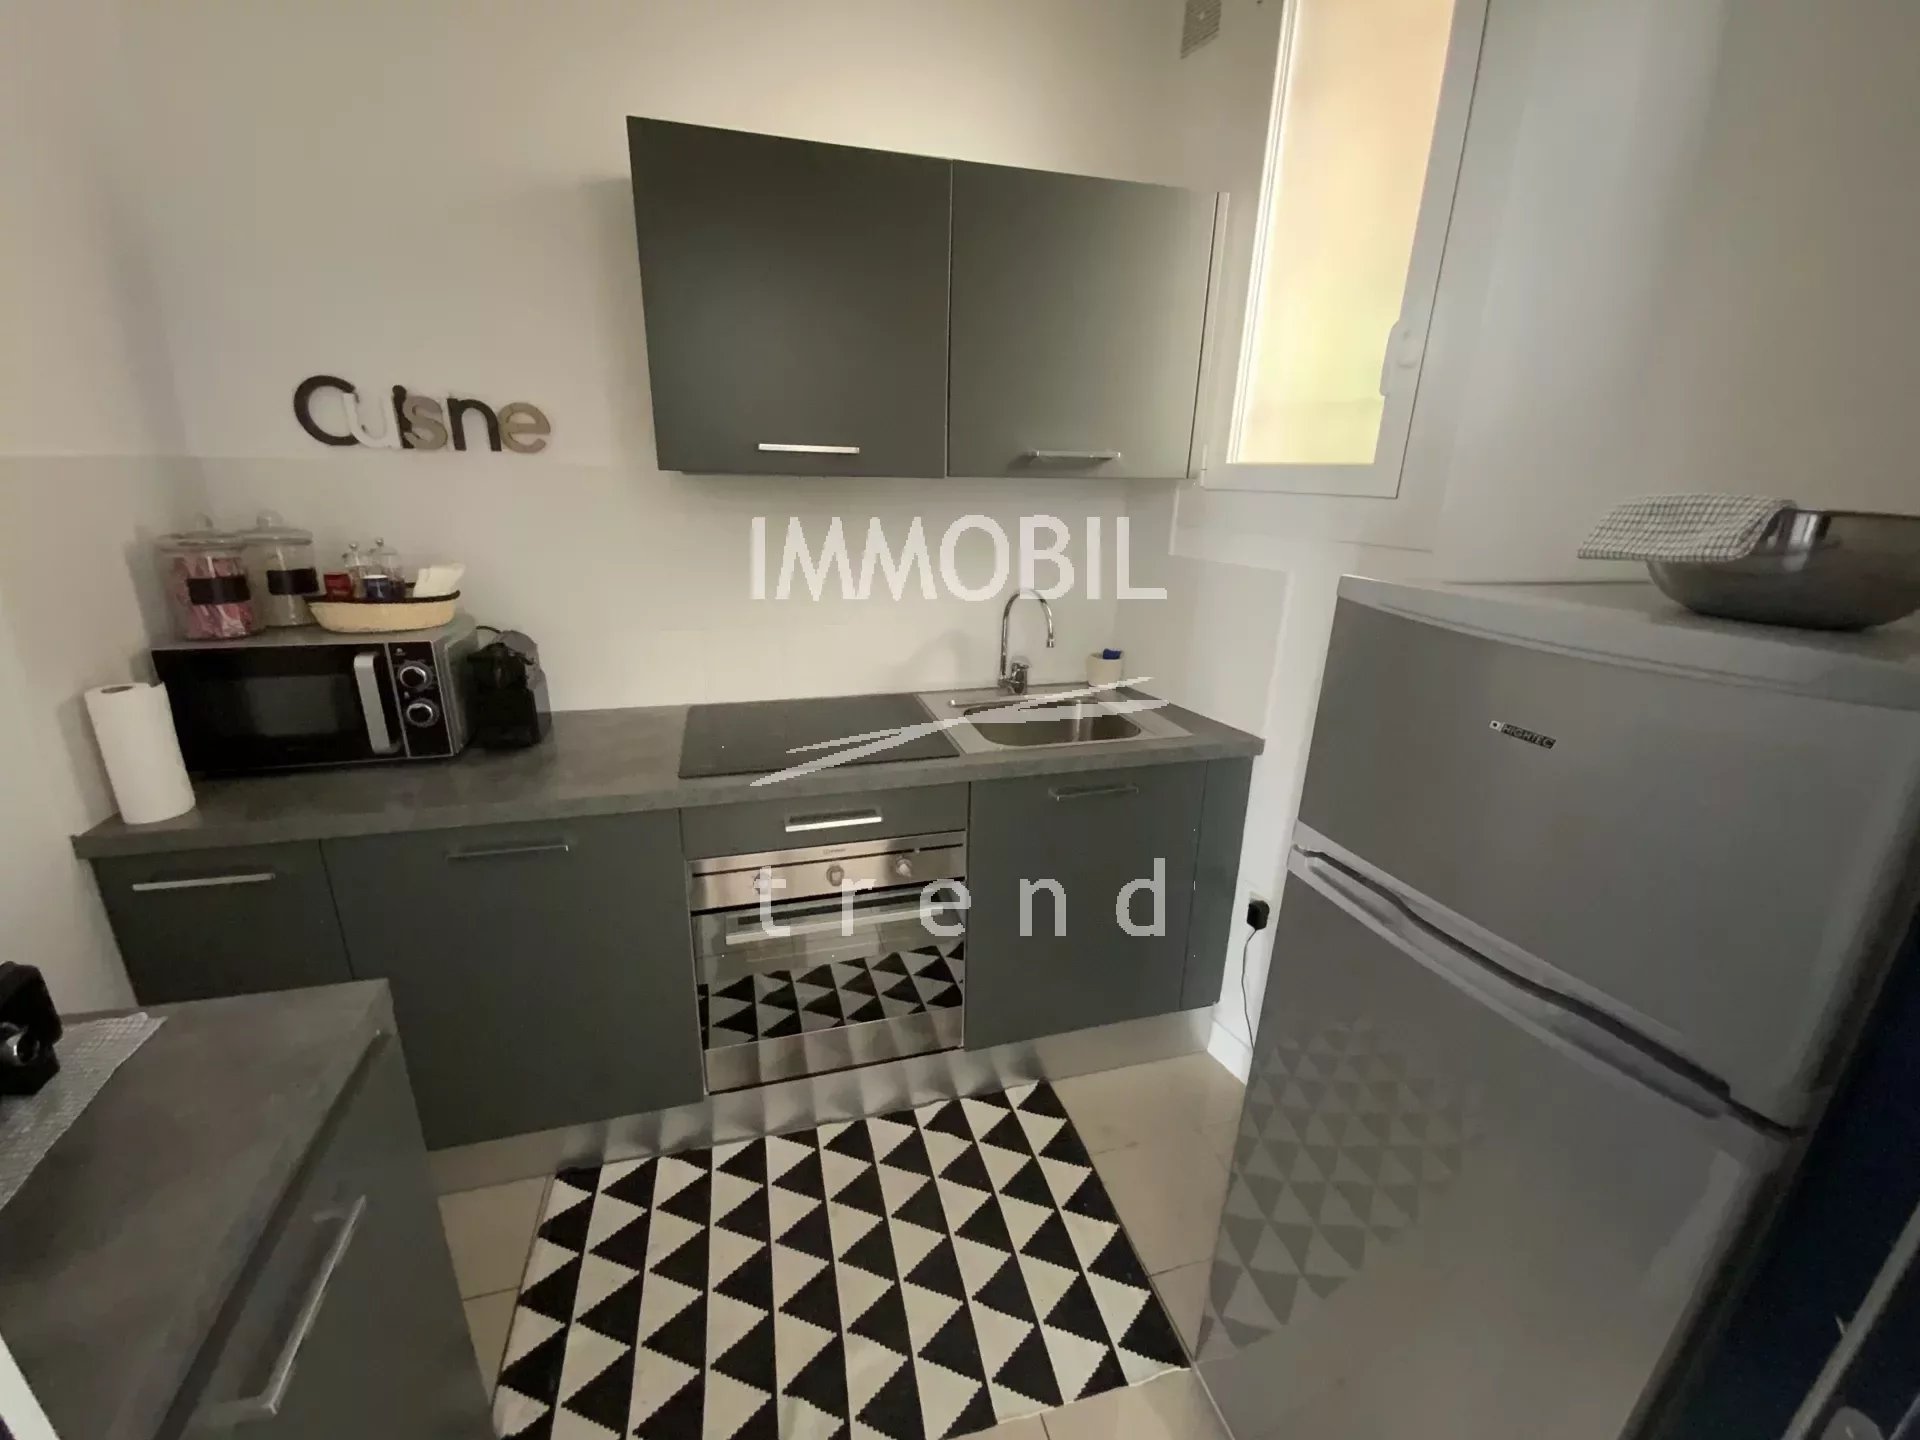 SOLE AGENT Menton Madone - 2 bedroom apartment with balcony for sale